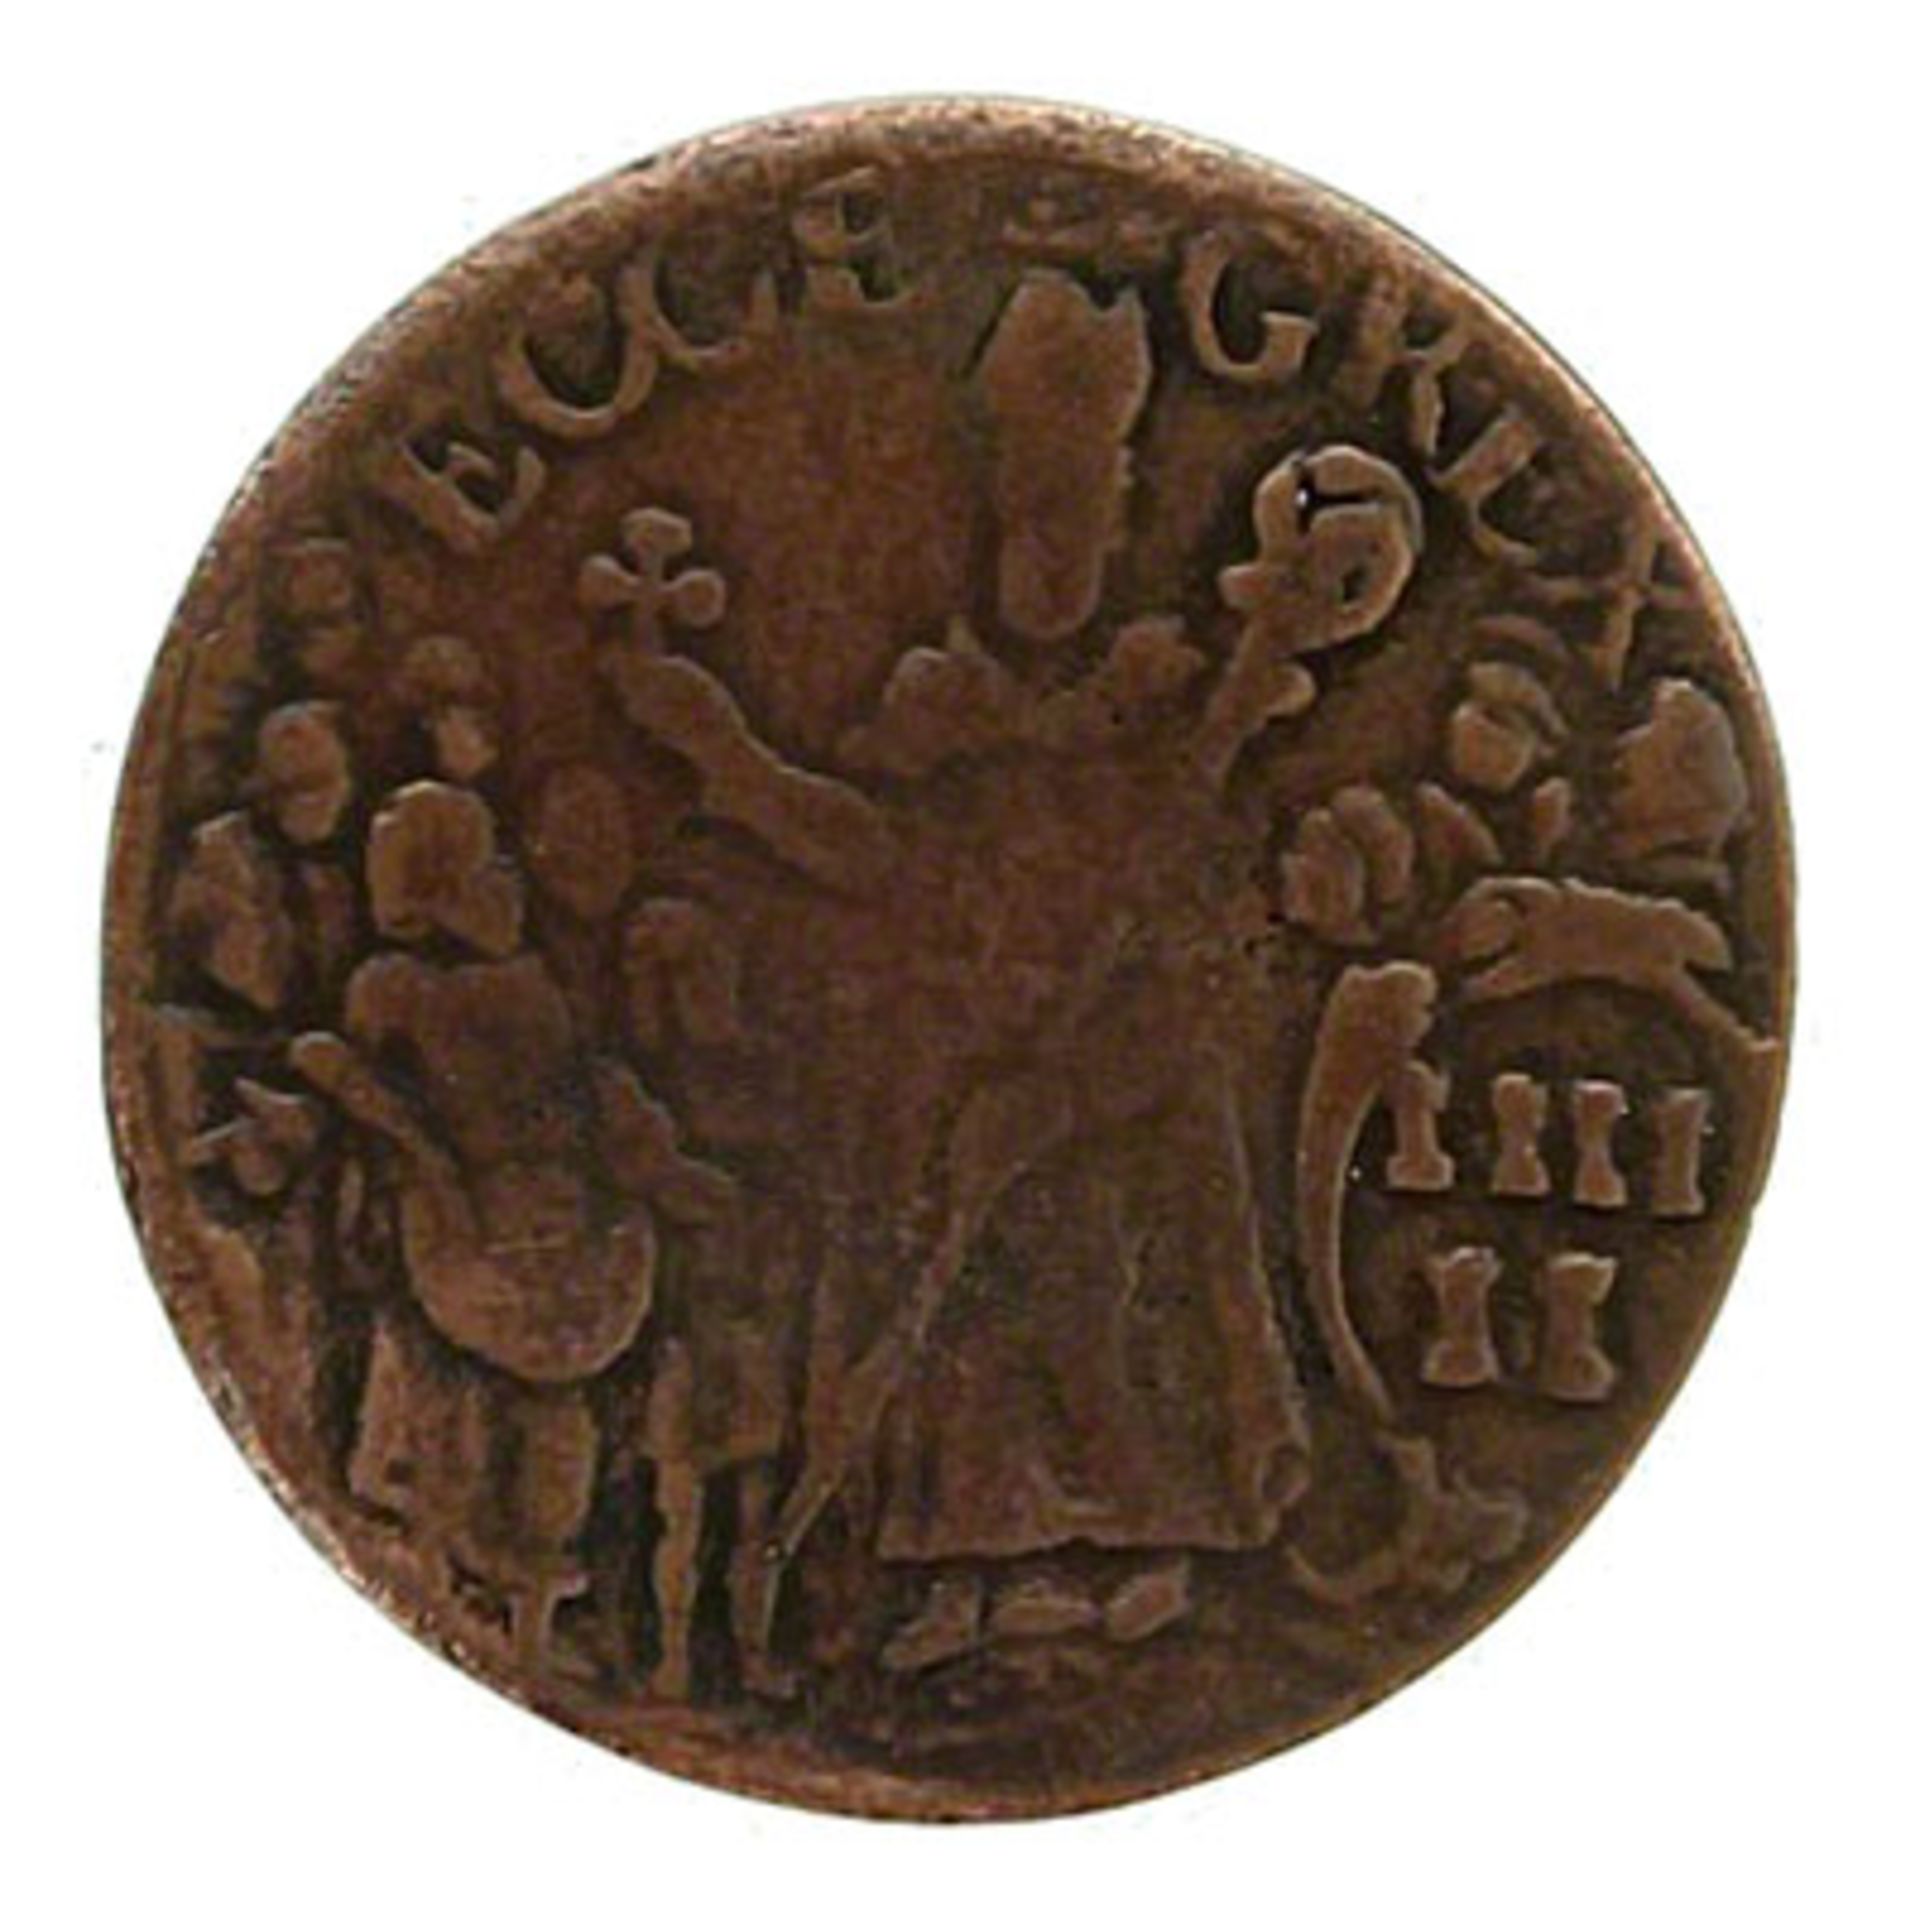 John Roche, St. Patrick 1678 Halfpenny Coin - Image 2 of 2